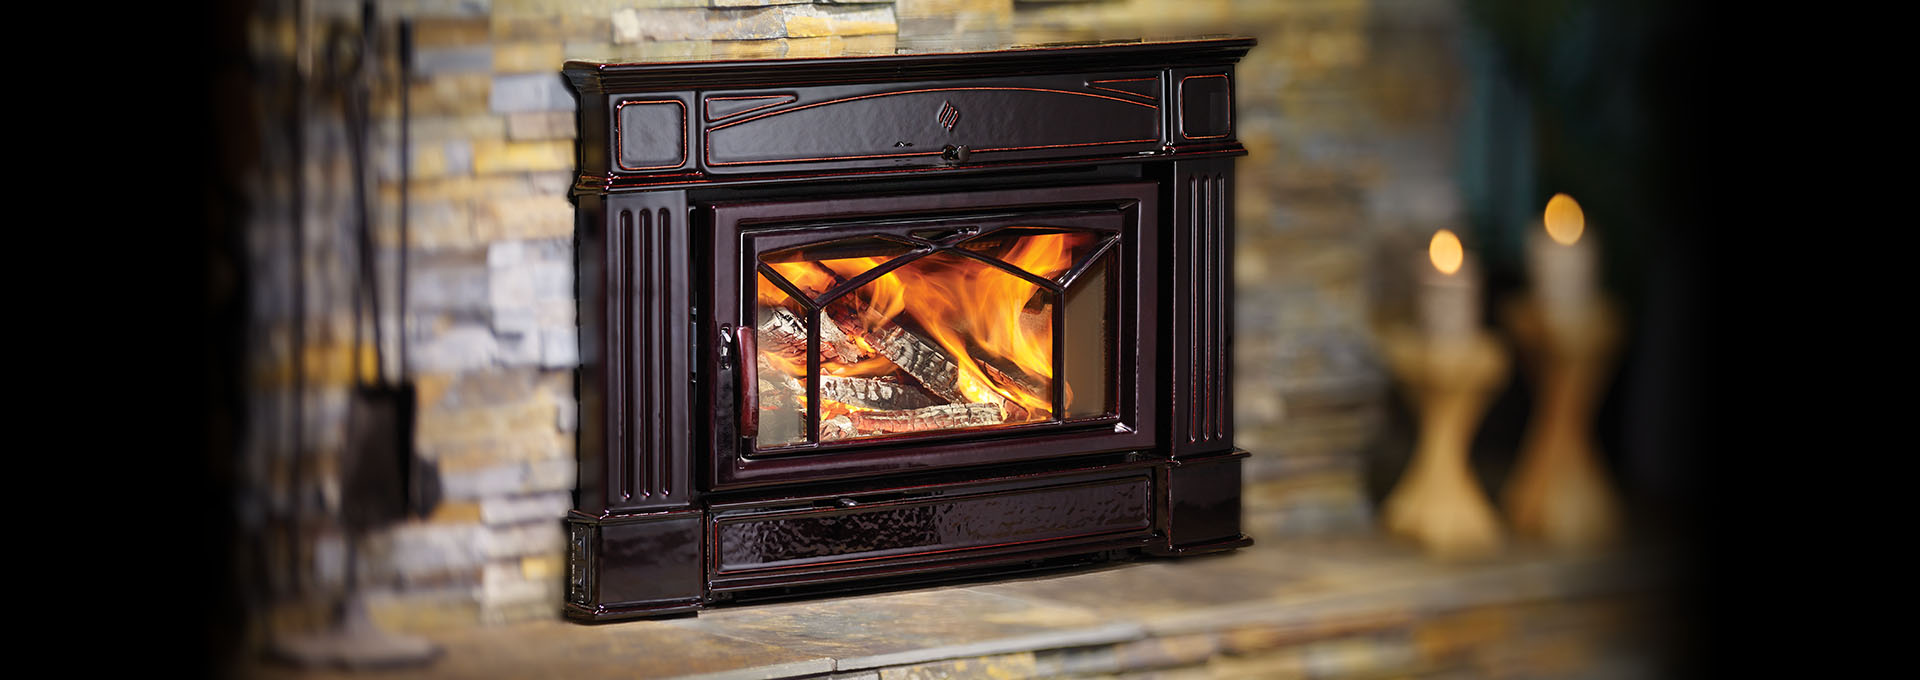 Space Heater that Looks Like Fireplace New Wood Inserts Epa Certified